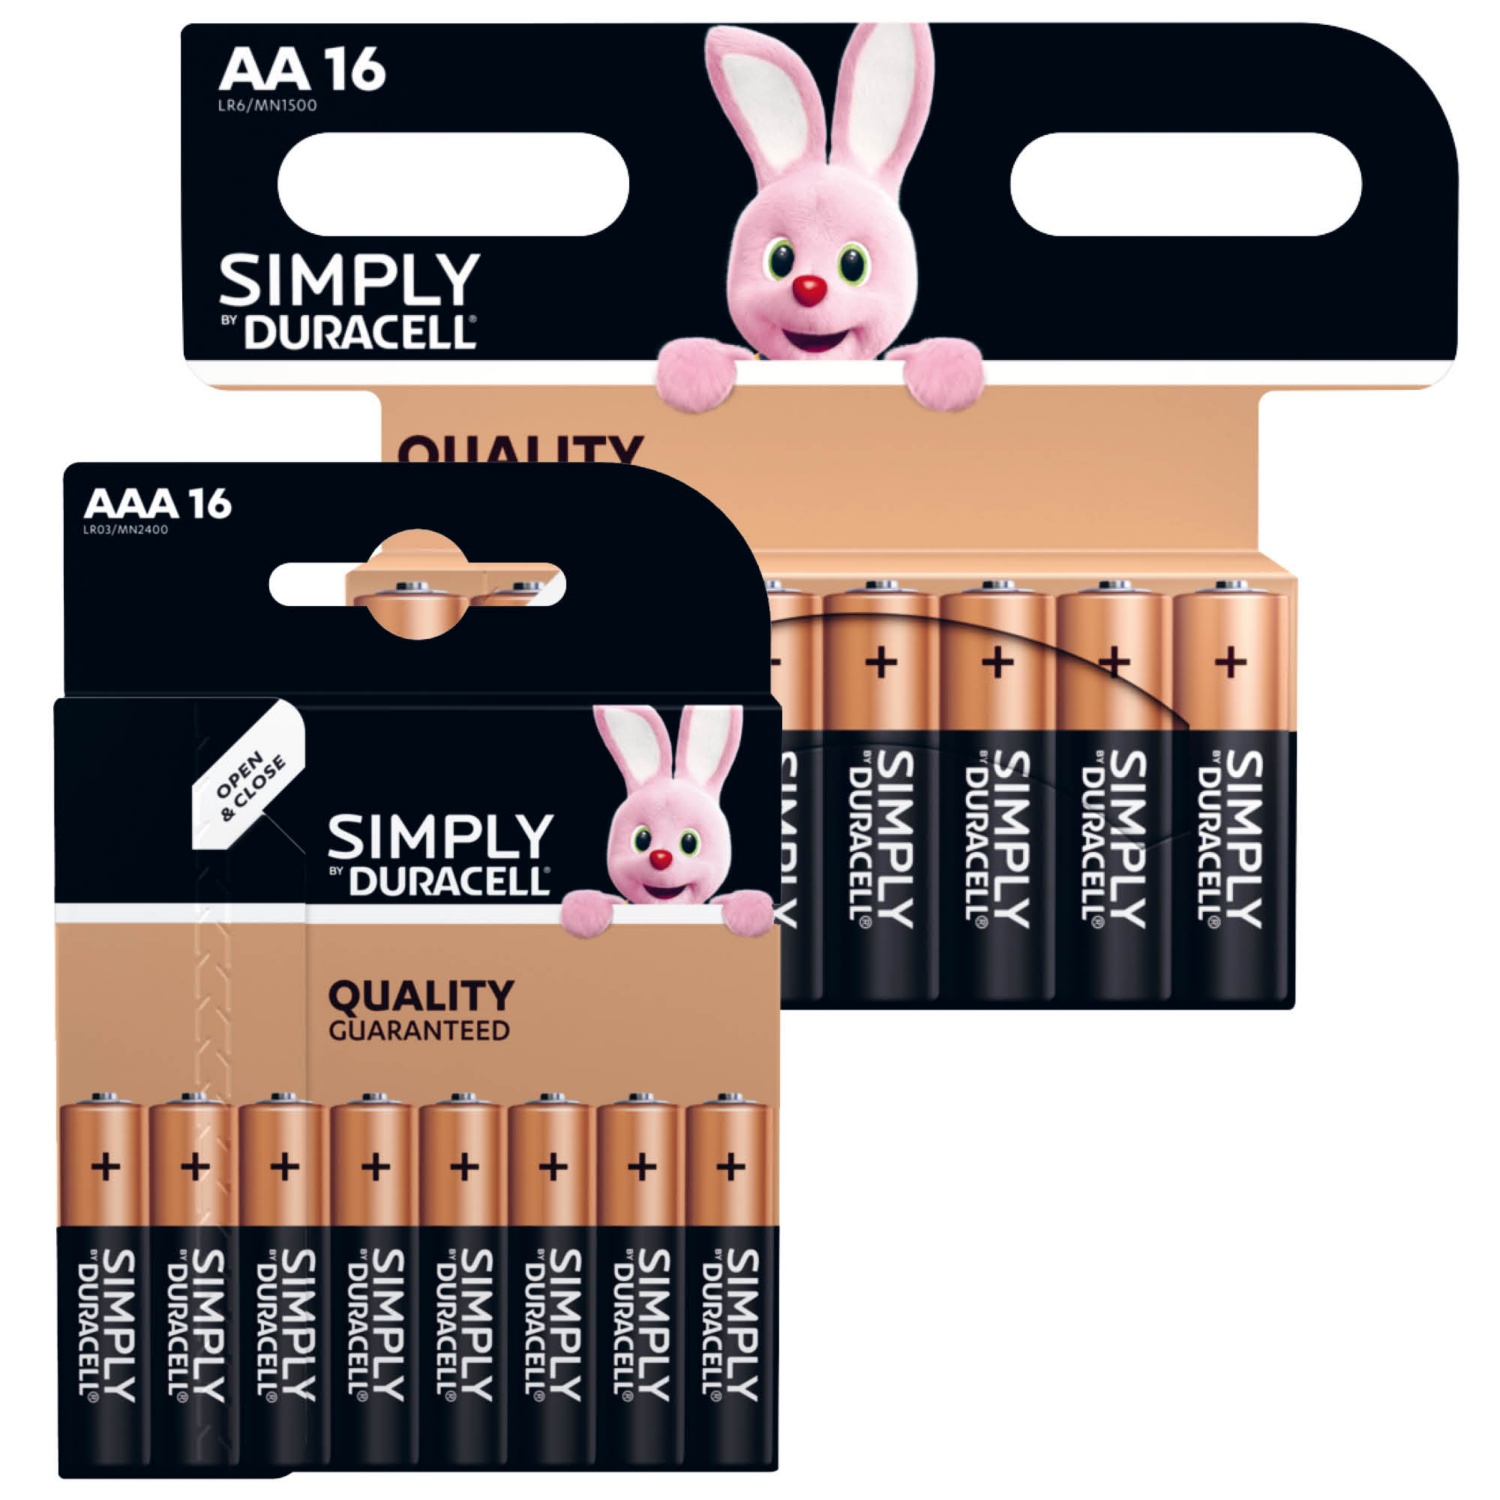 DURACELL Piles Simply AA/AAA